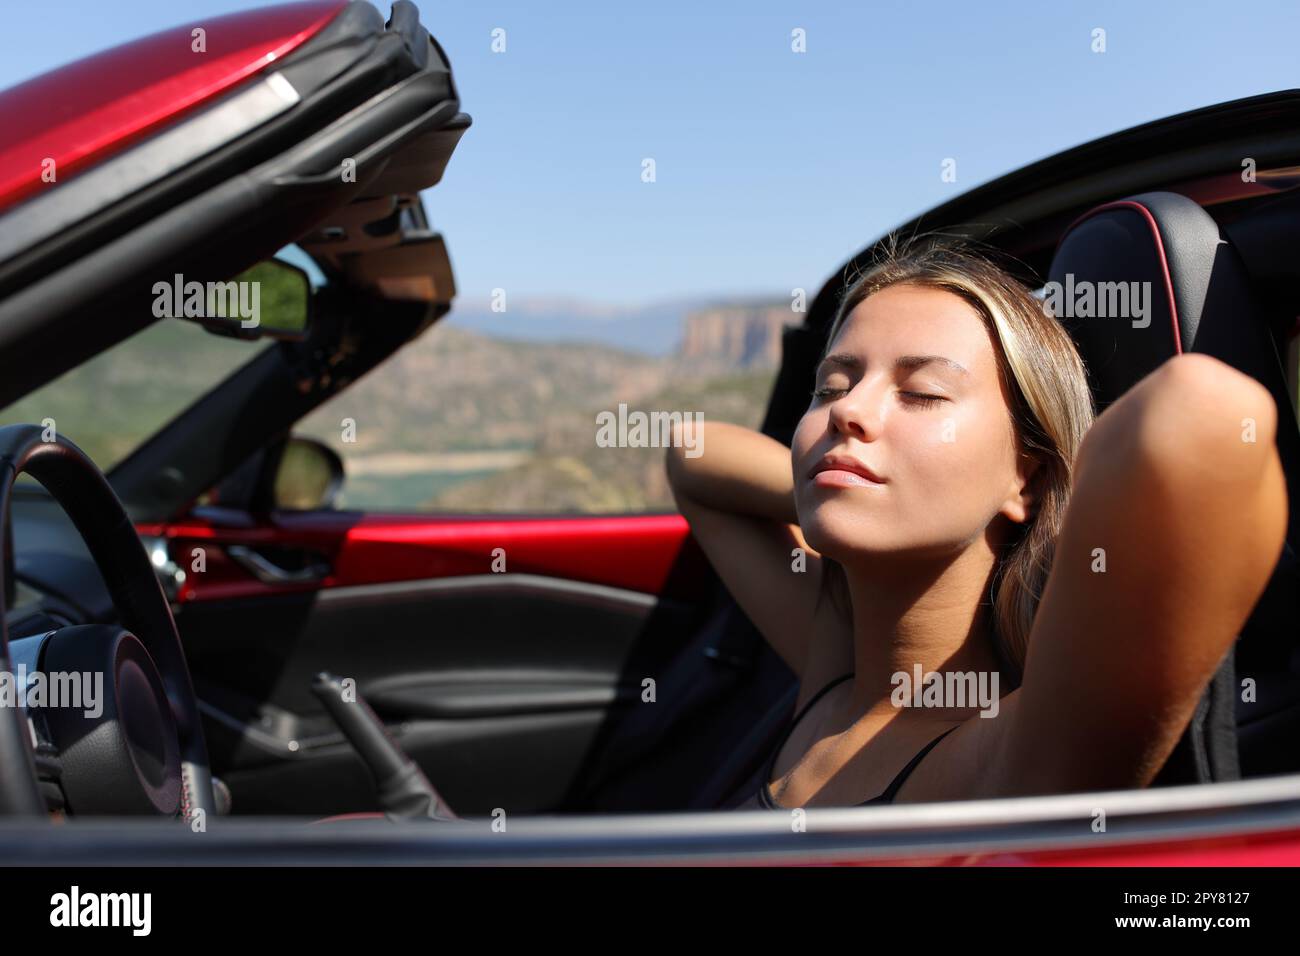 Convertible car driver resting a sunny day Stock Photo